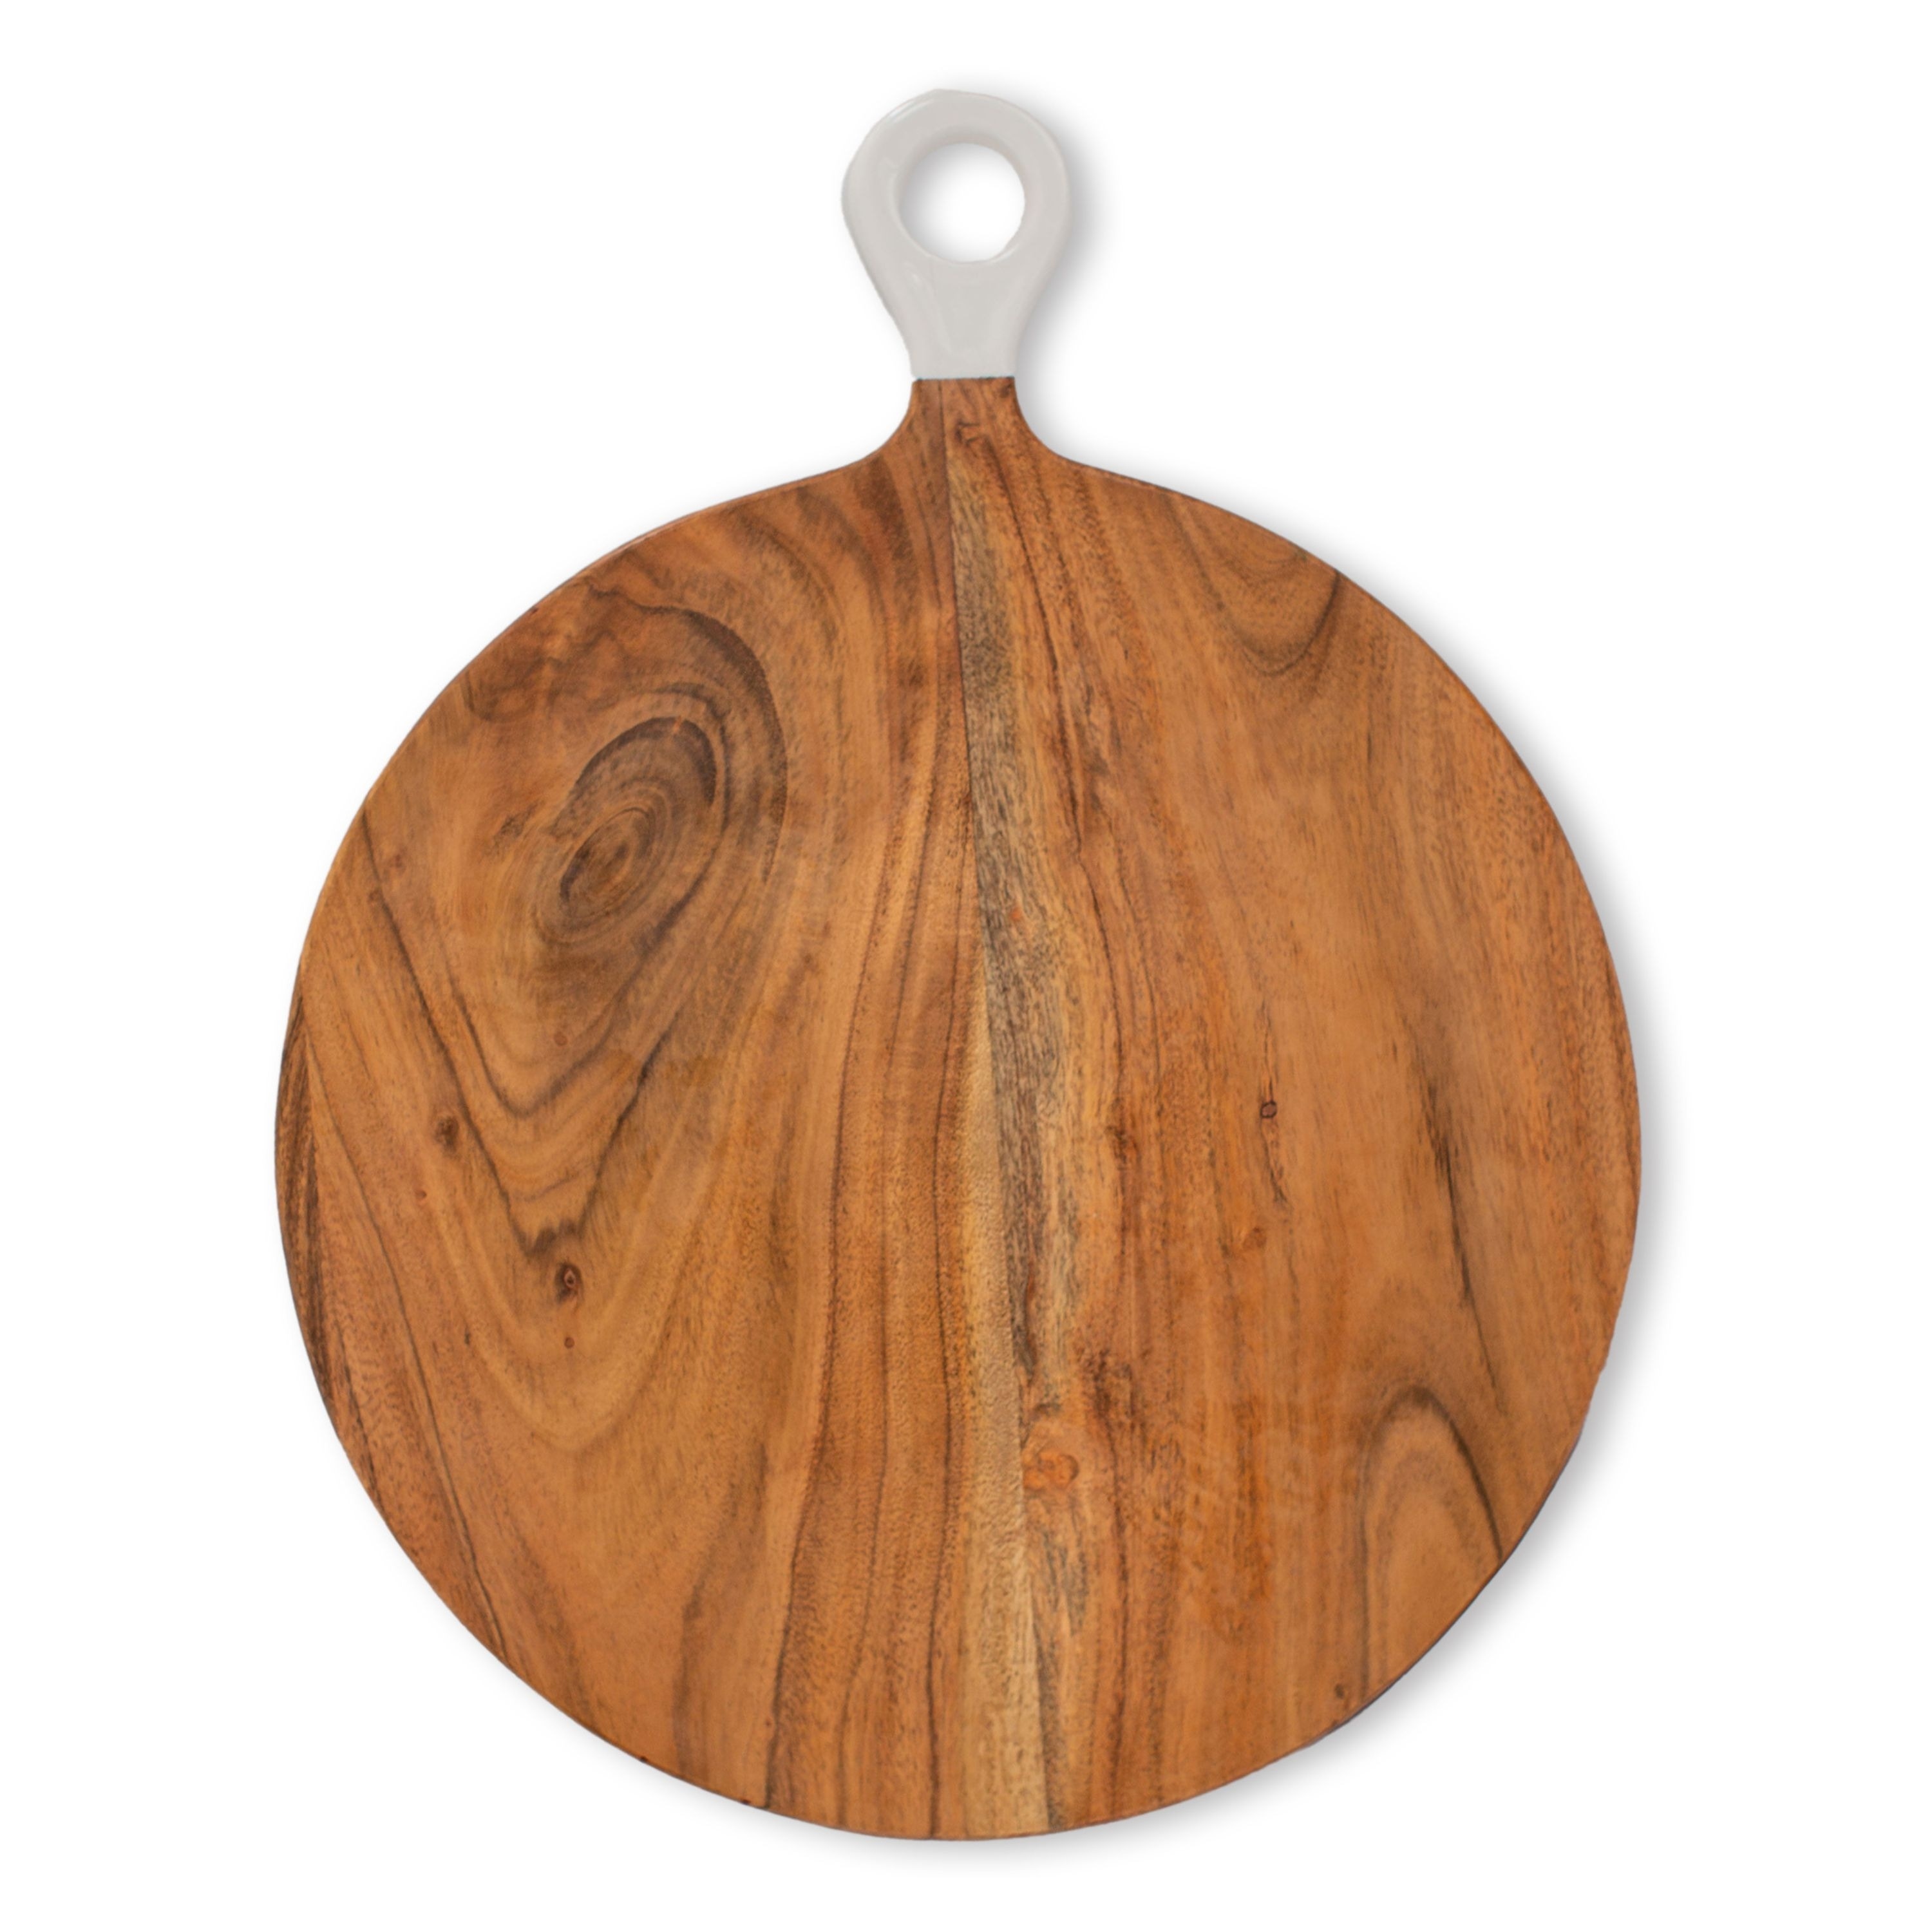 https://ak1.ostkcdn.com/images/products/is/images/direct/68258aabc03cb945fac4ab08e4b6ff4ff9627f32/Jeanne-Fitz-Wood-%2B-White-Collection-Acacia-Wood-Round-Charcuterie-Board%2C-Large.jpg